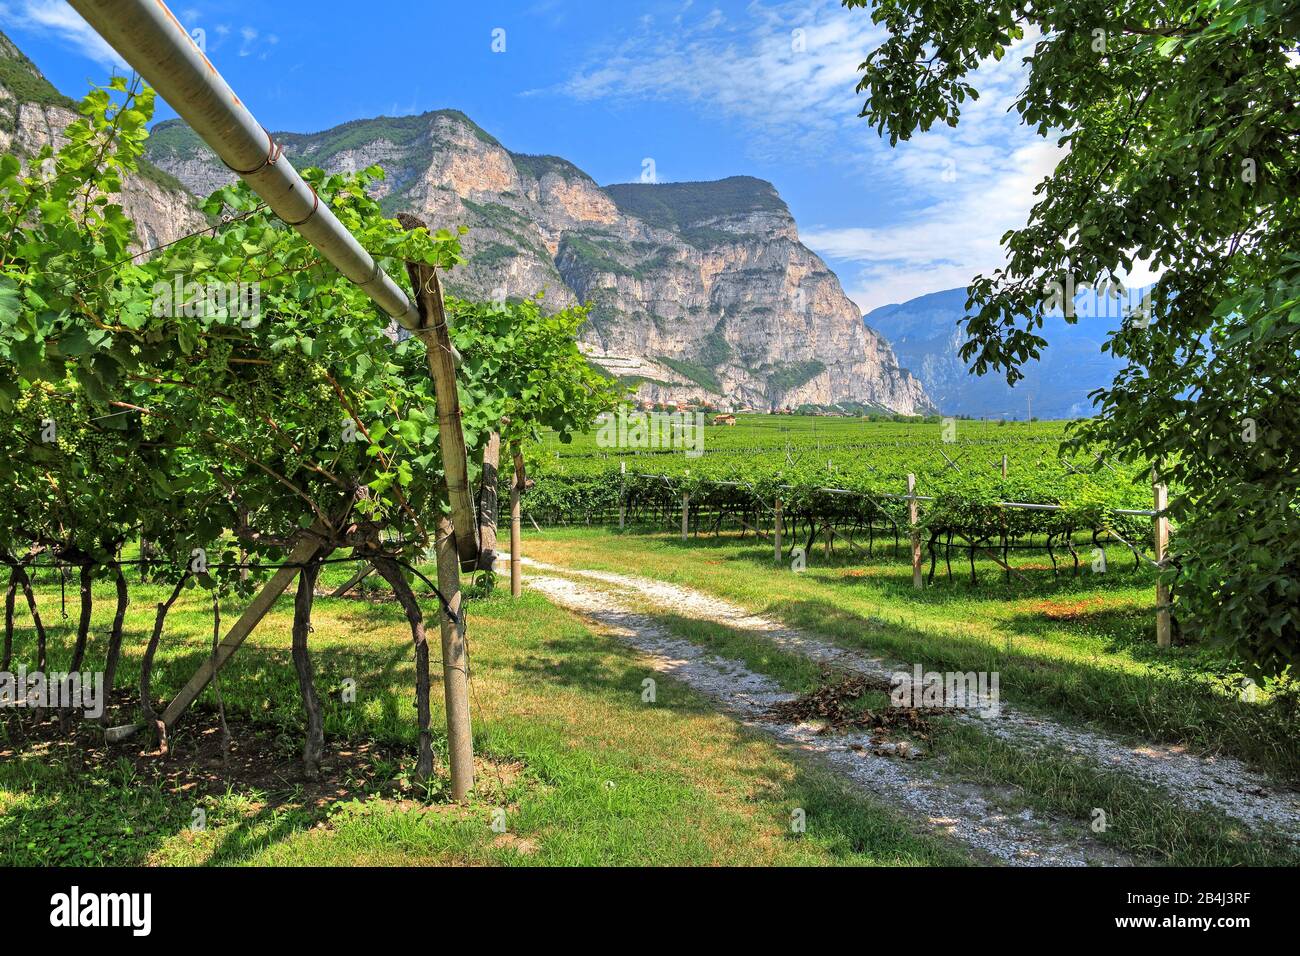 Vineyards under steep cliffs on the Trentino wine route in the Adige Valley near Rovere della Luna, Trentino, South Tyrol, Italy Stock Photo